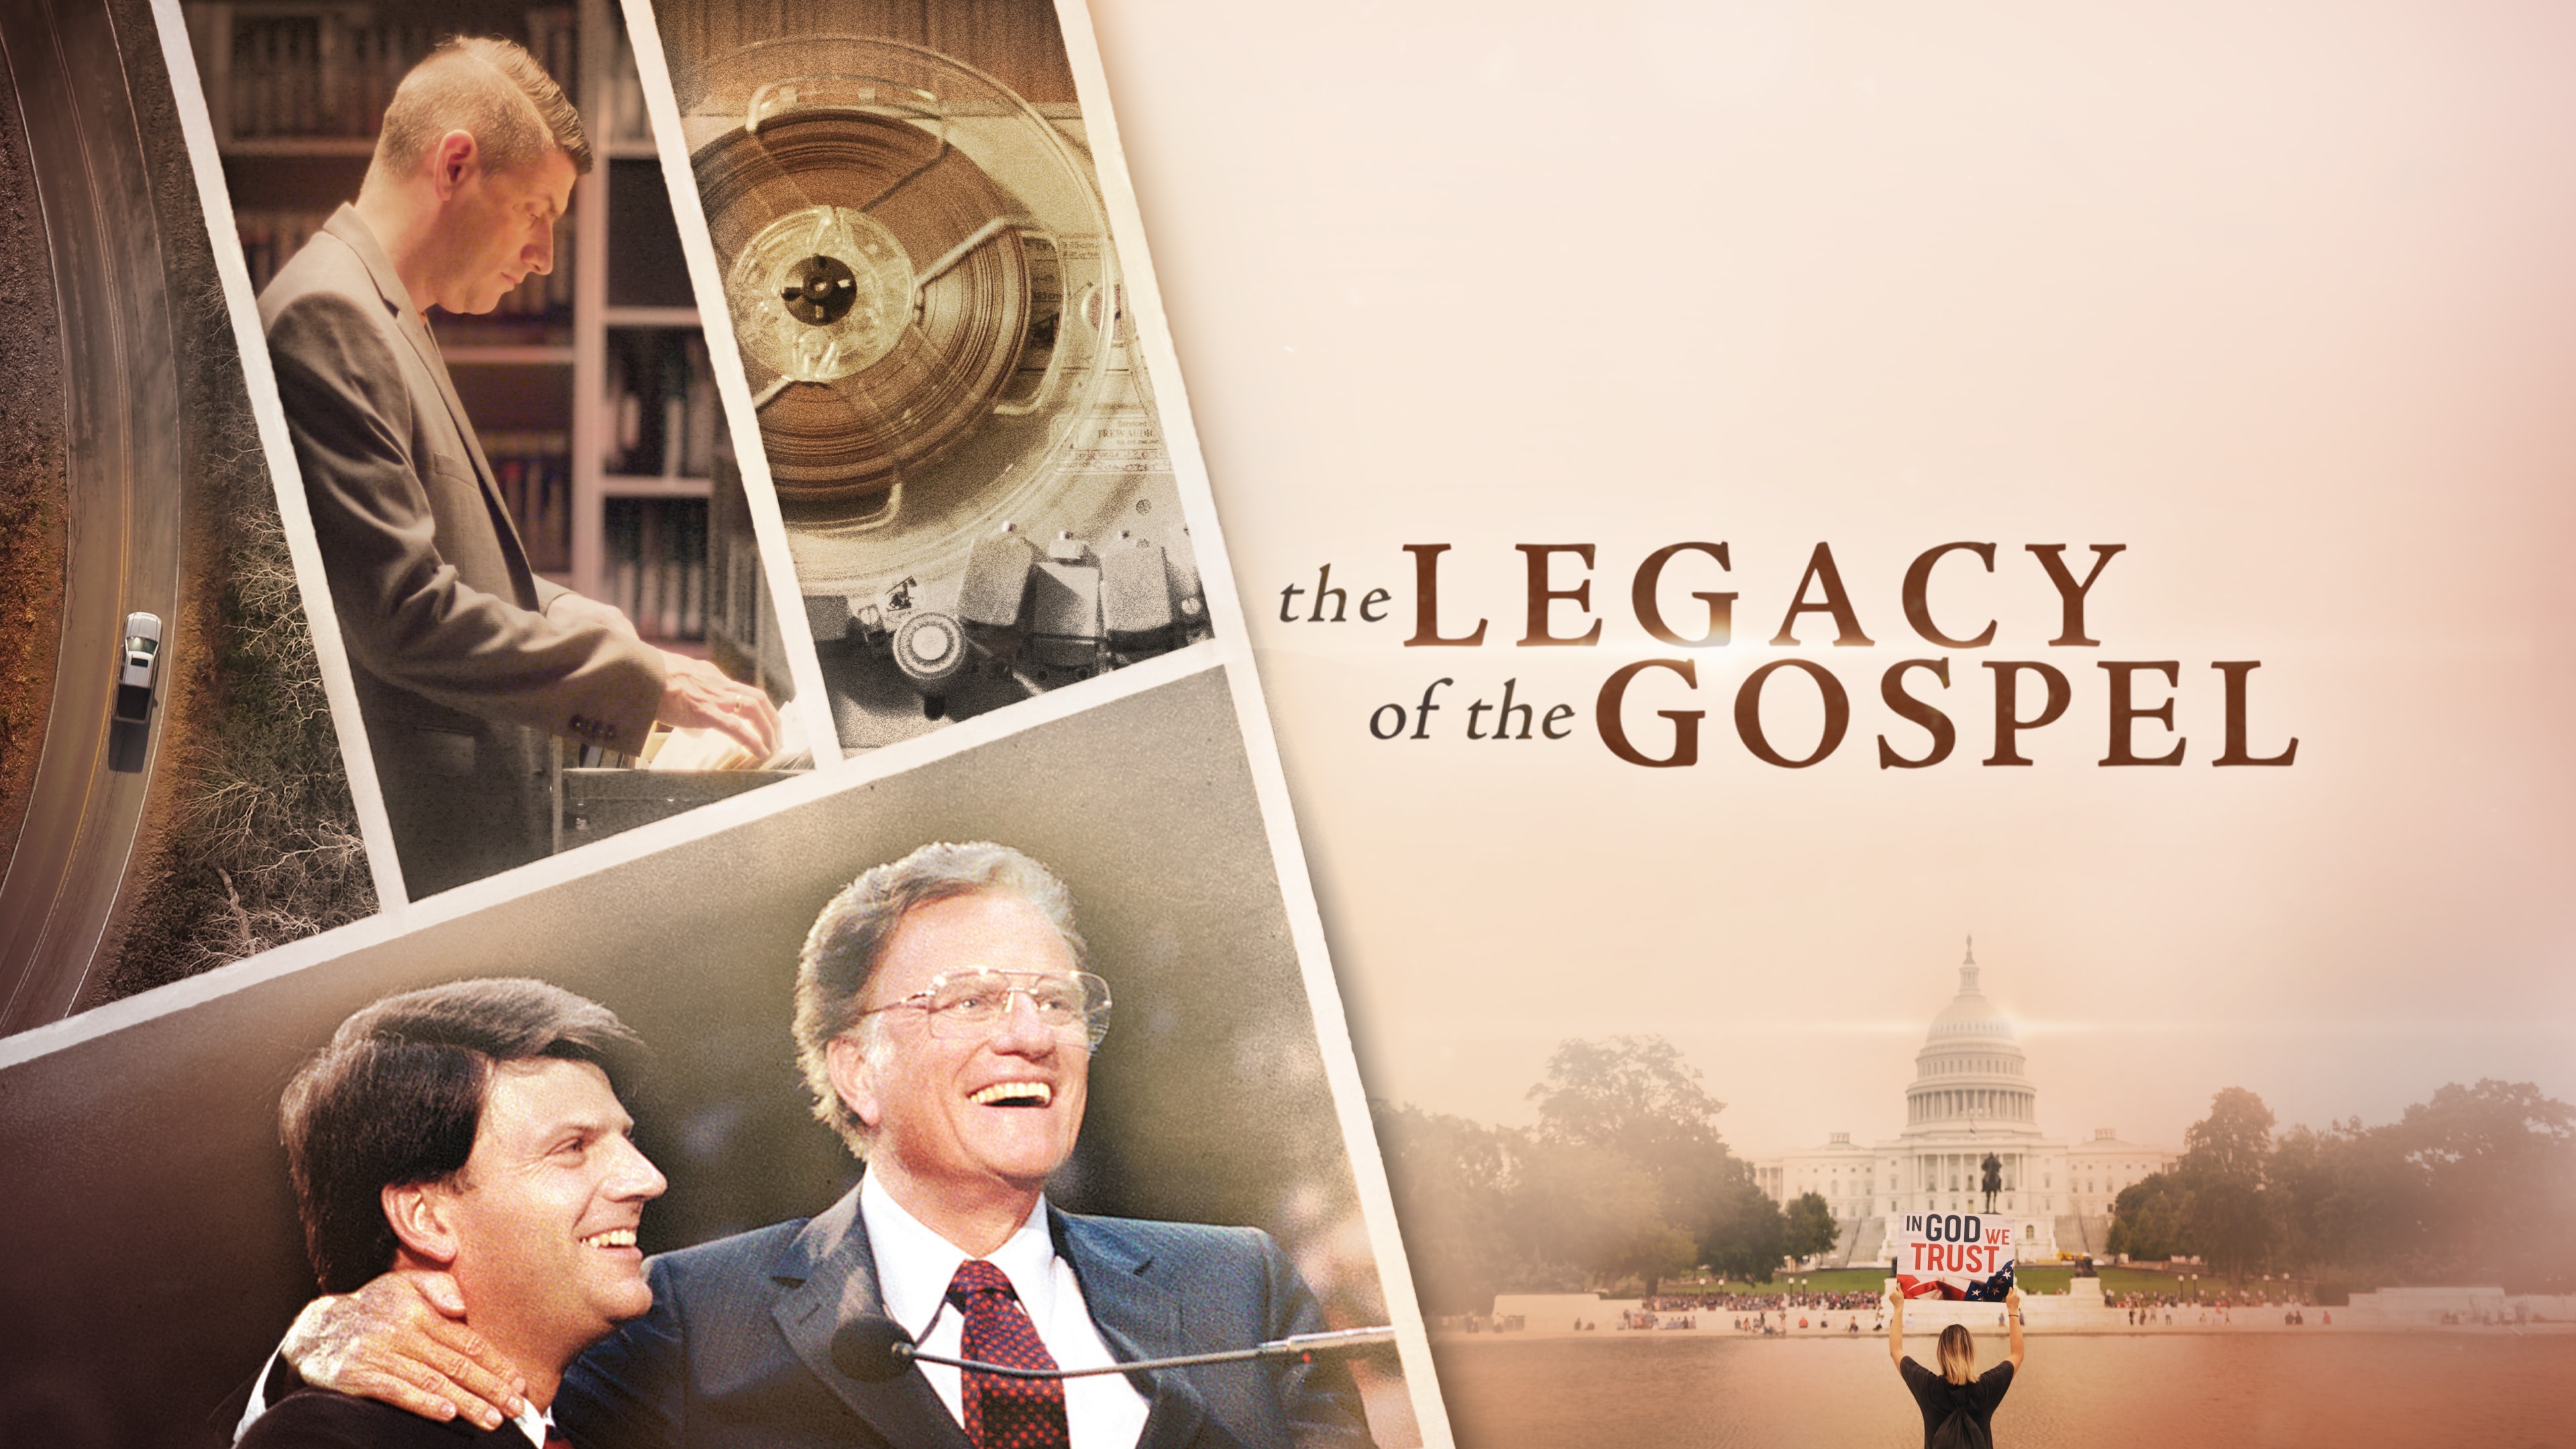 The Legacy of the Gospel